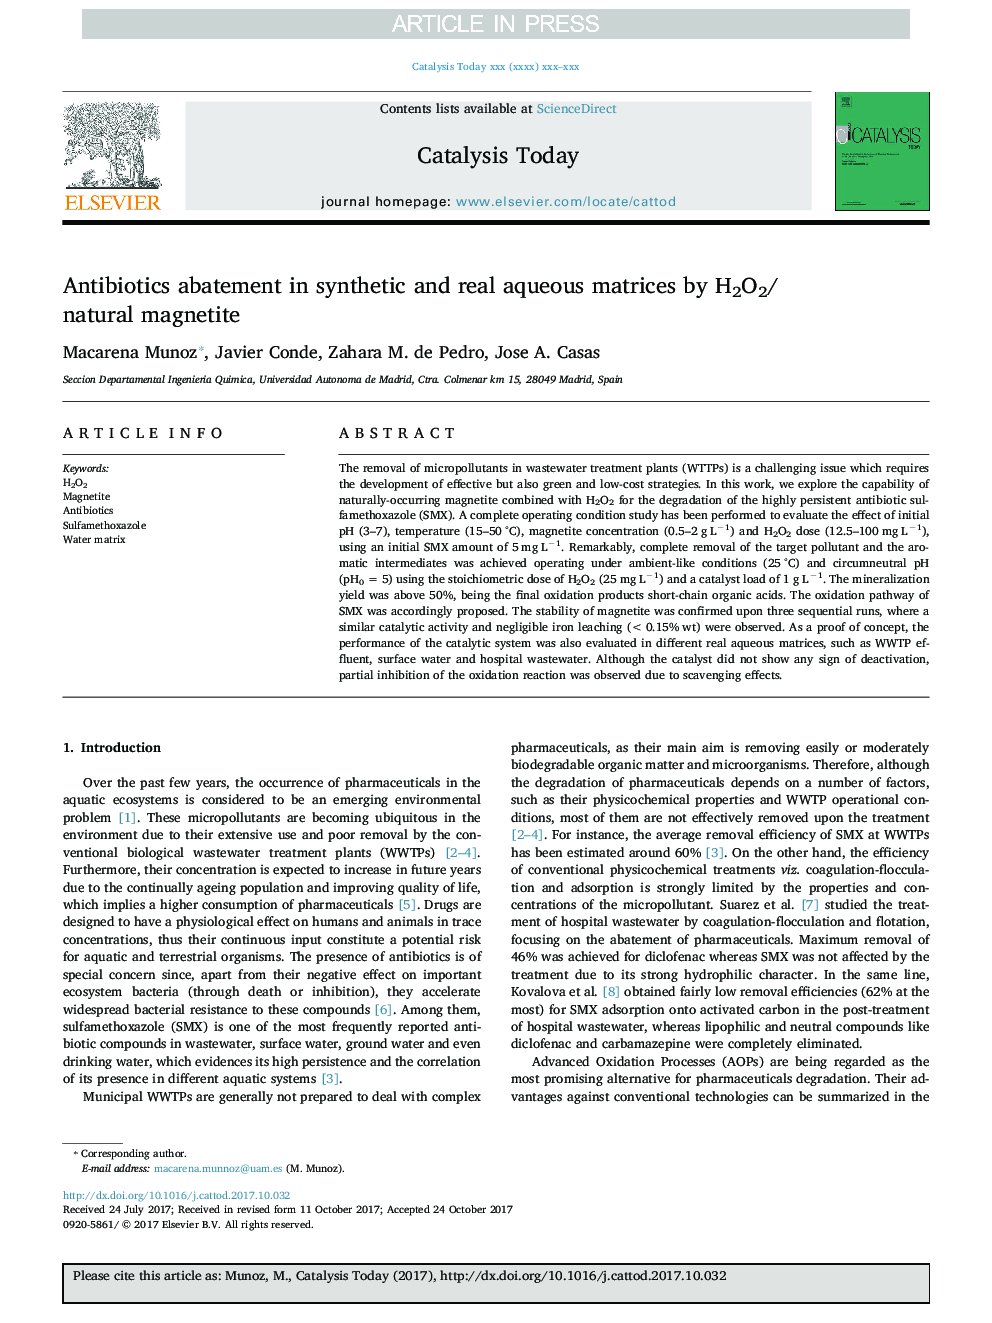 Antibiotics abatement in synthetic and real aqueous matrices by H2O2/natural magnetite